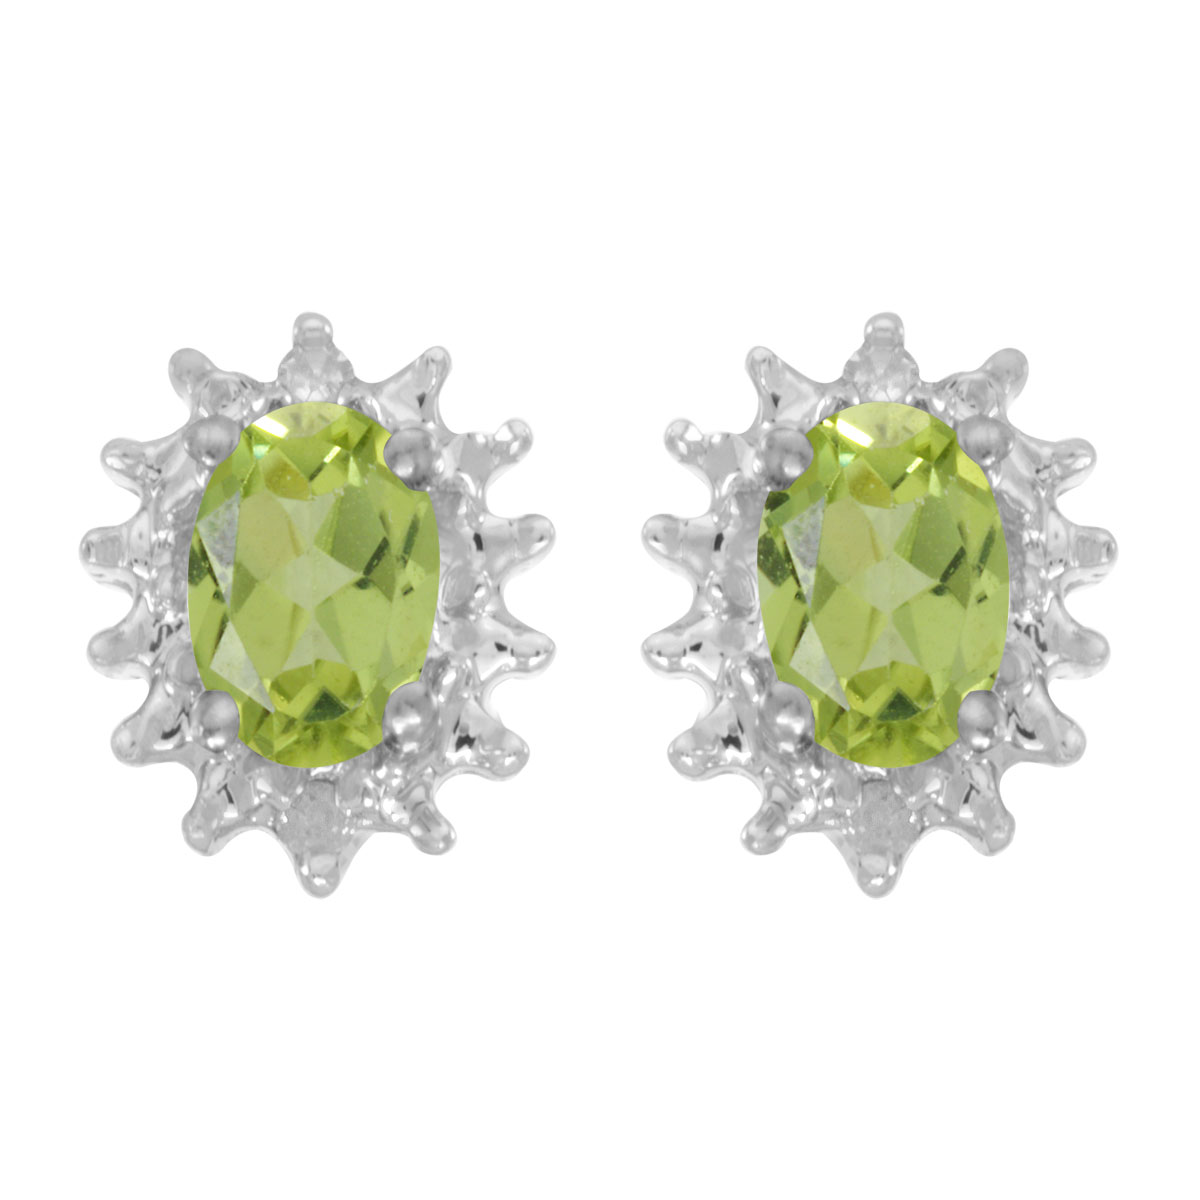 JCX2008: These 14k white gold oval peridot and diamond earrings feature 6x4 mm genuine natural peridots with a 0.80 ct total weight and .04 ct diamonds.